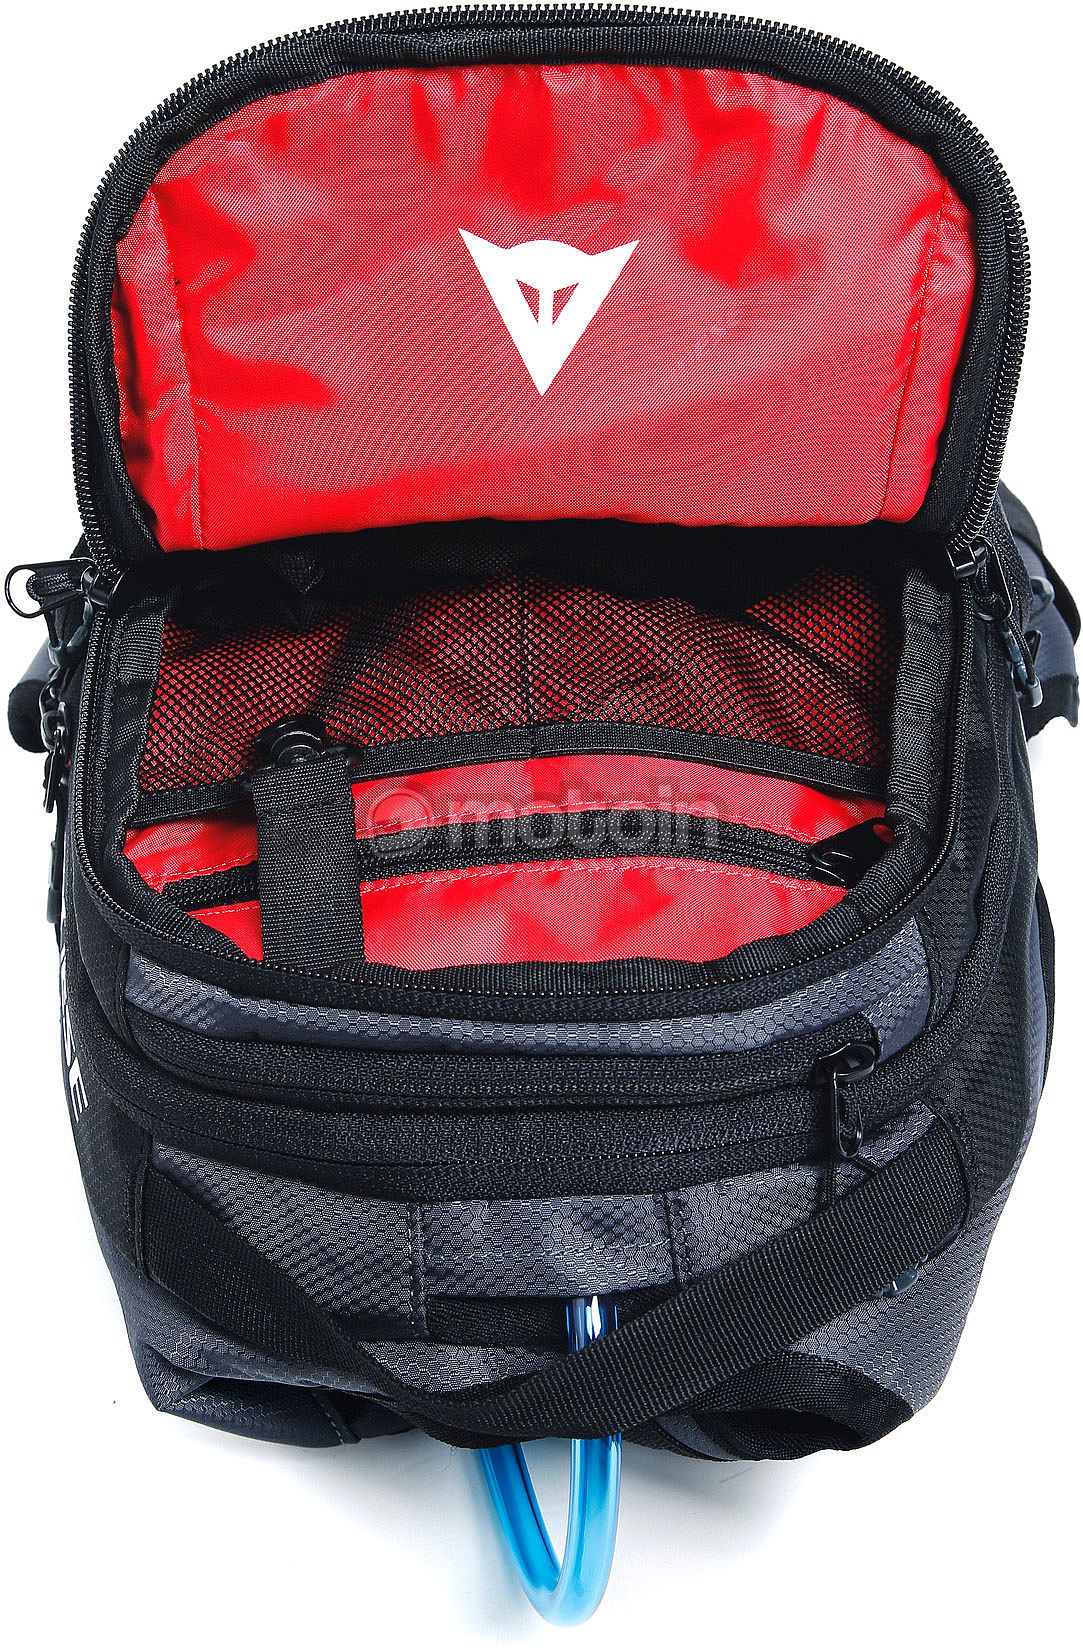 D-Throttle Backpack - Dainese Motorcycle Bag (Official Shop)